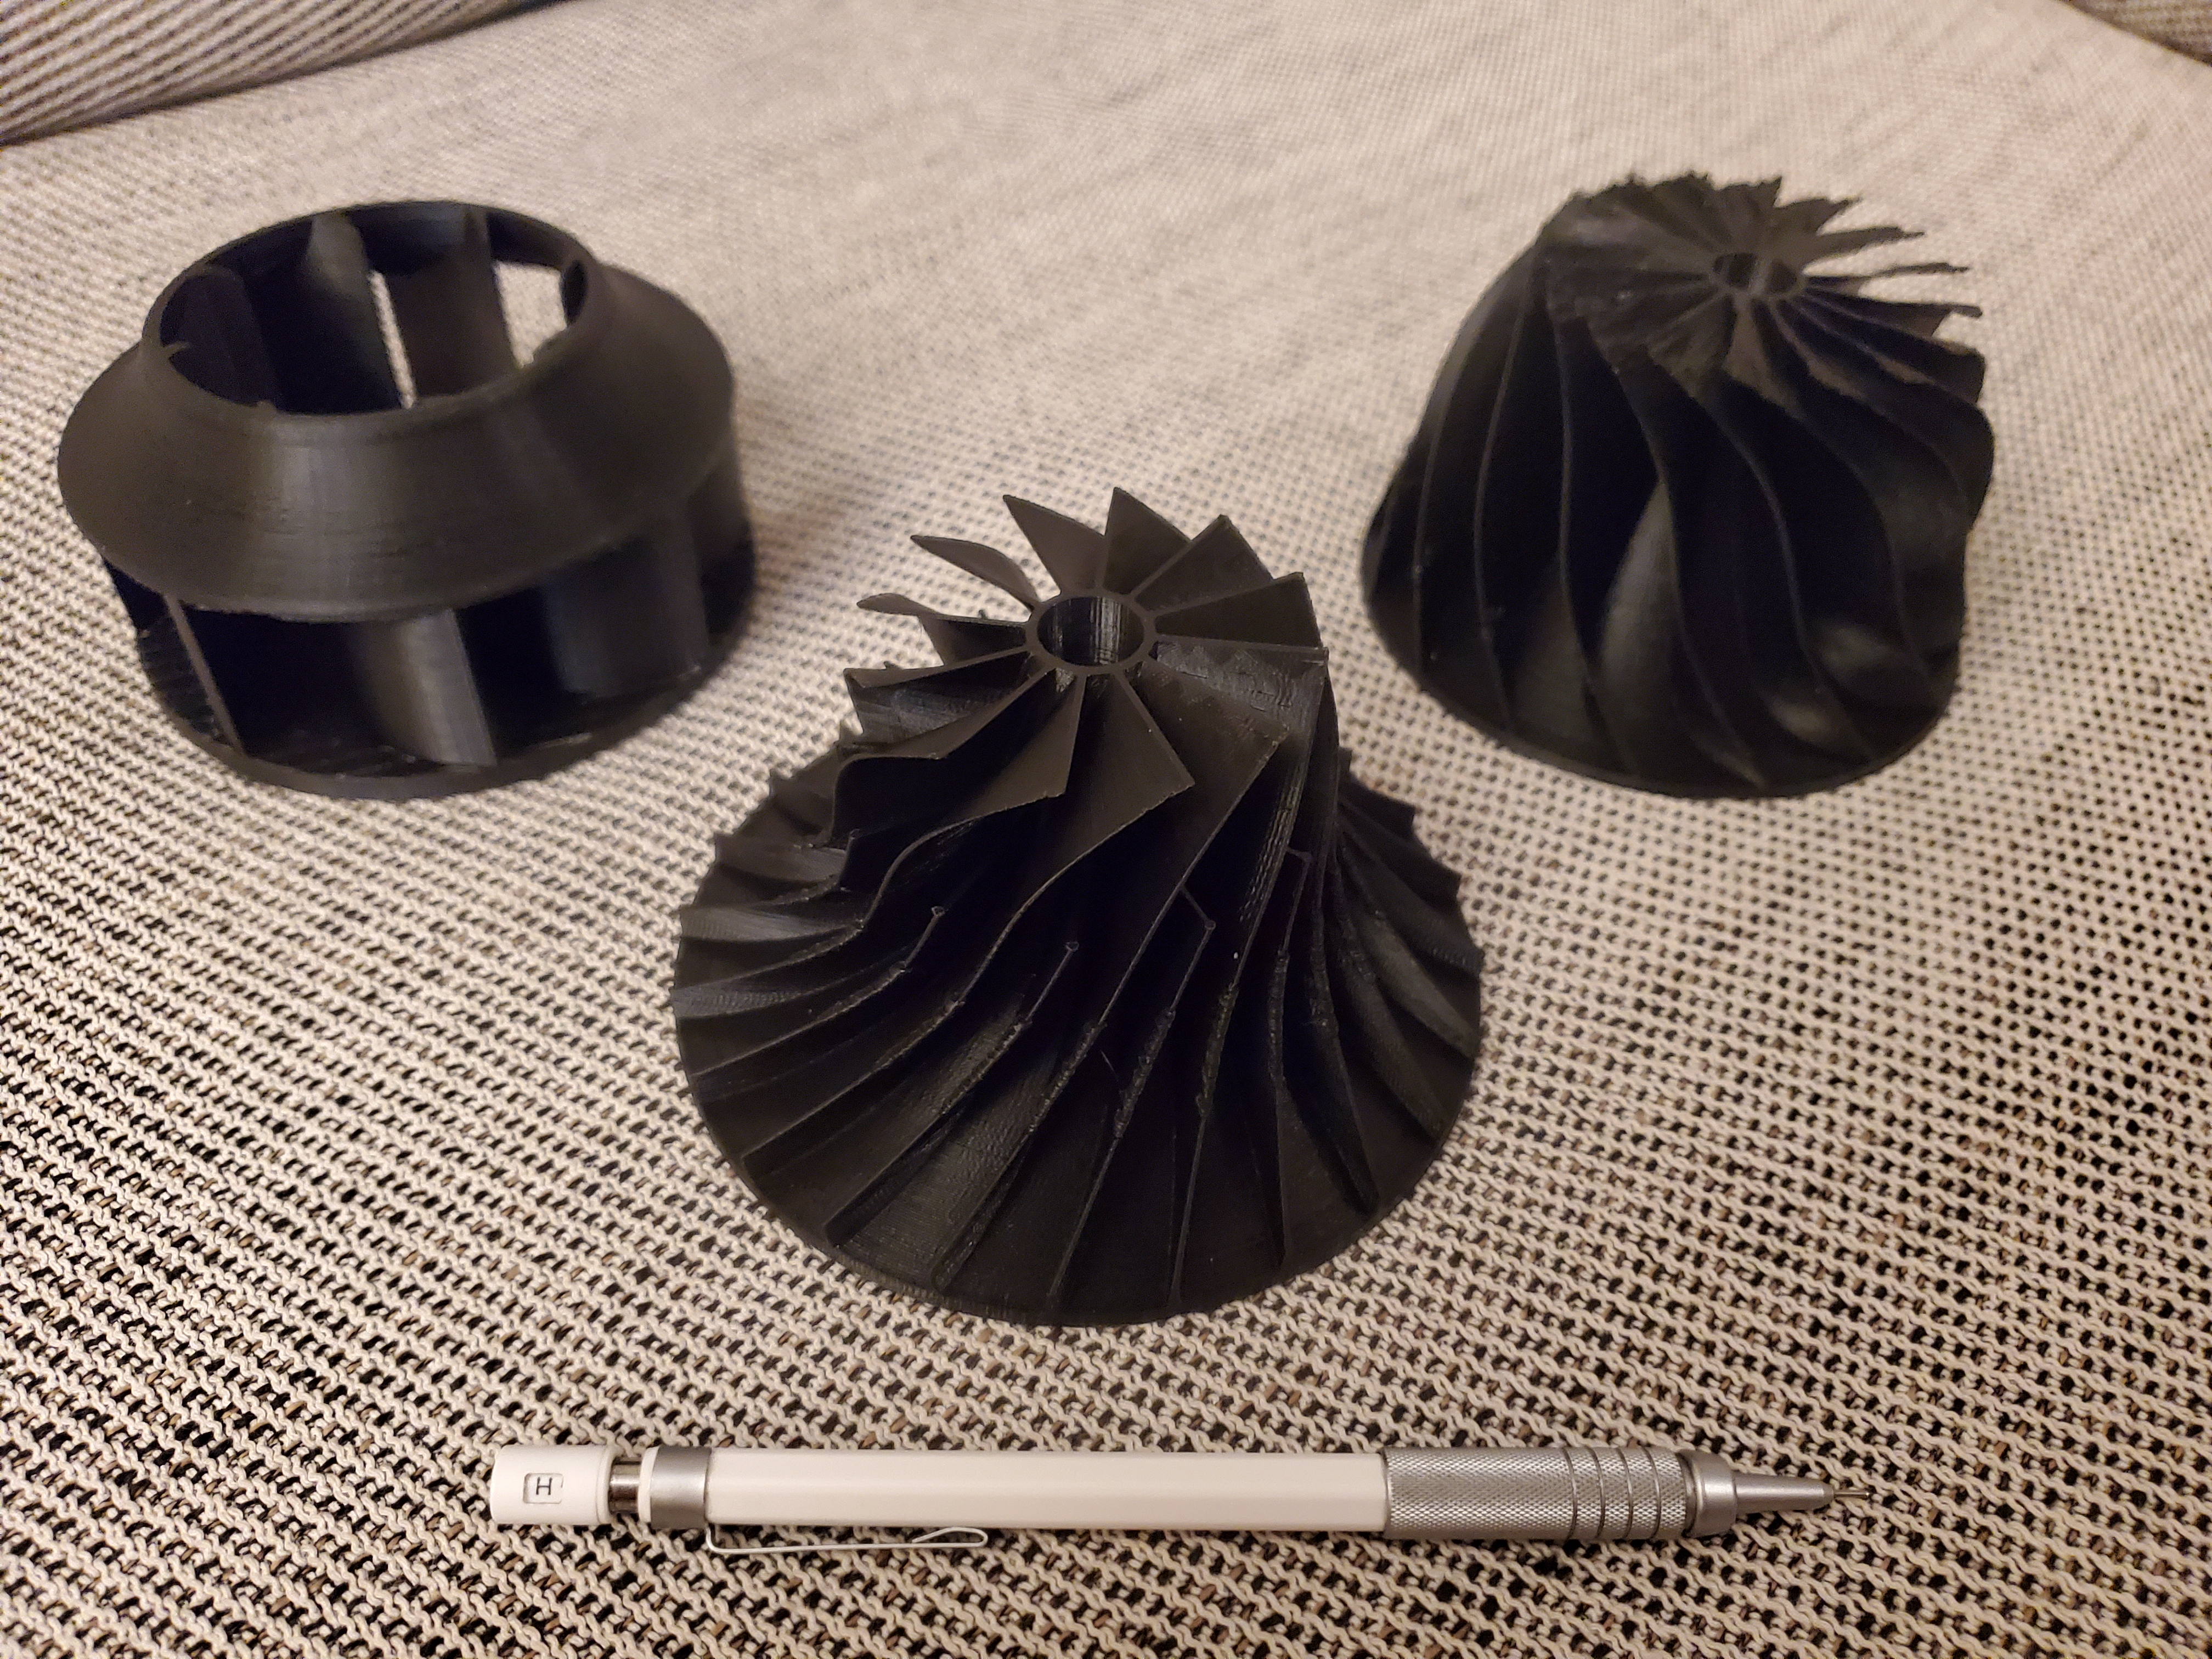  The first three impellers I designed